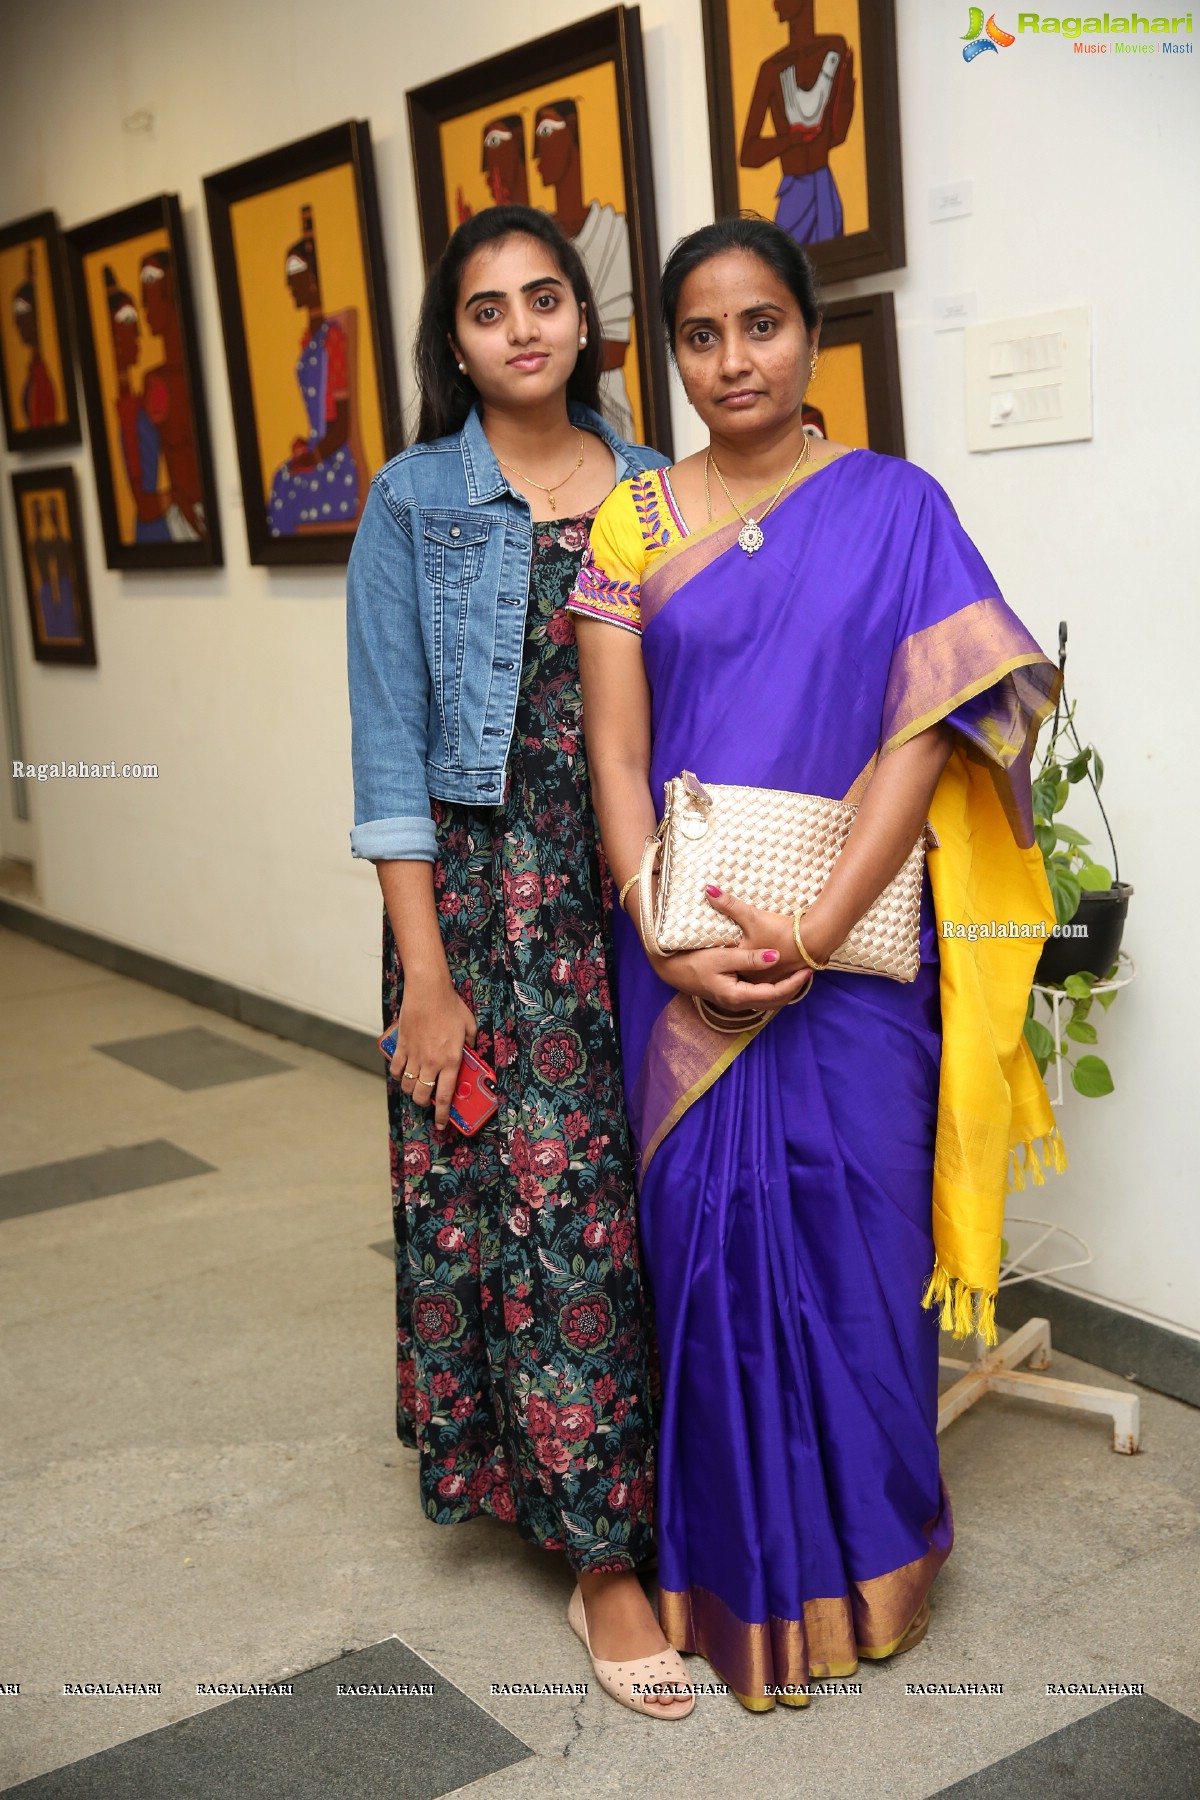 Aalankritha Art Gallery Paintings Exhibition Titled 'Inherent'